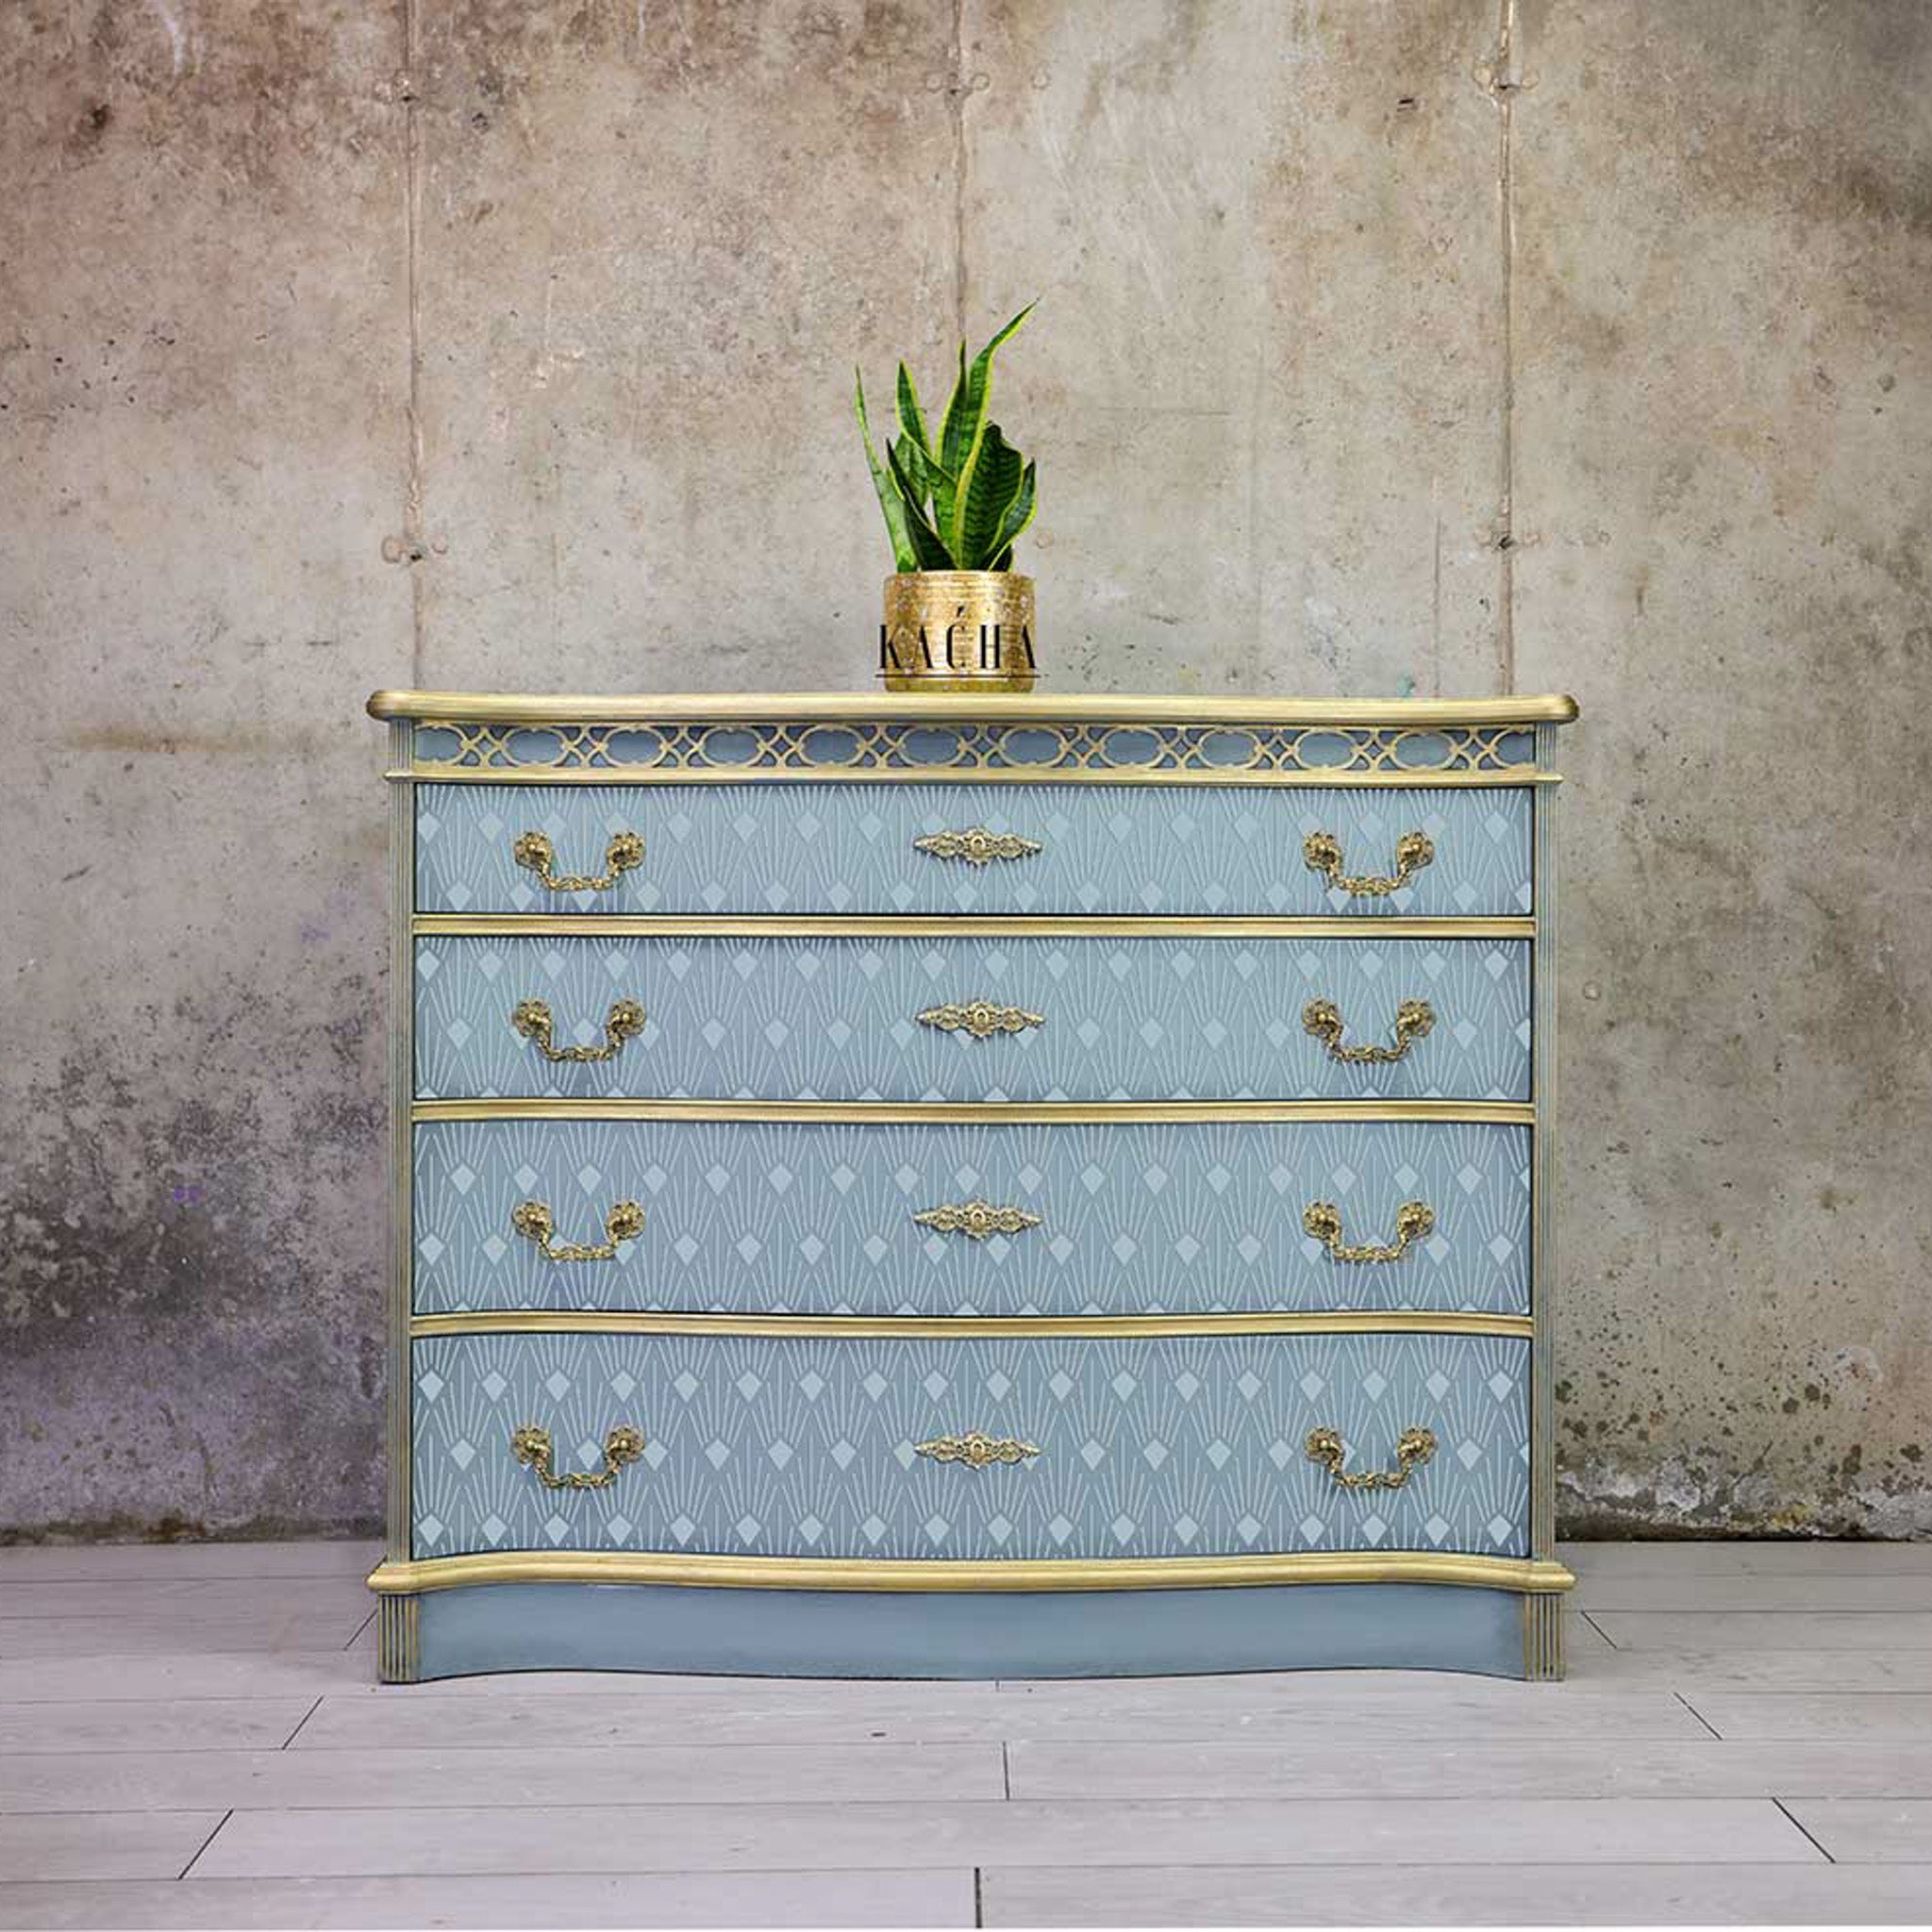 A 4-drawer dresser painted light blue with gold accents features ReDesign with Prima's Sunlit Diamonds stencil in an even lighter blue on its drwers.